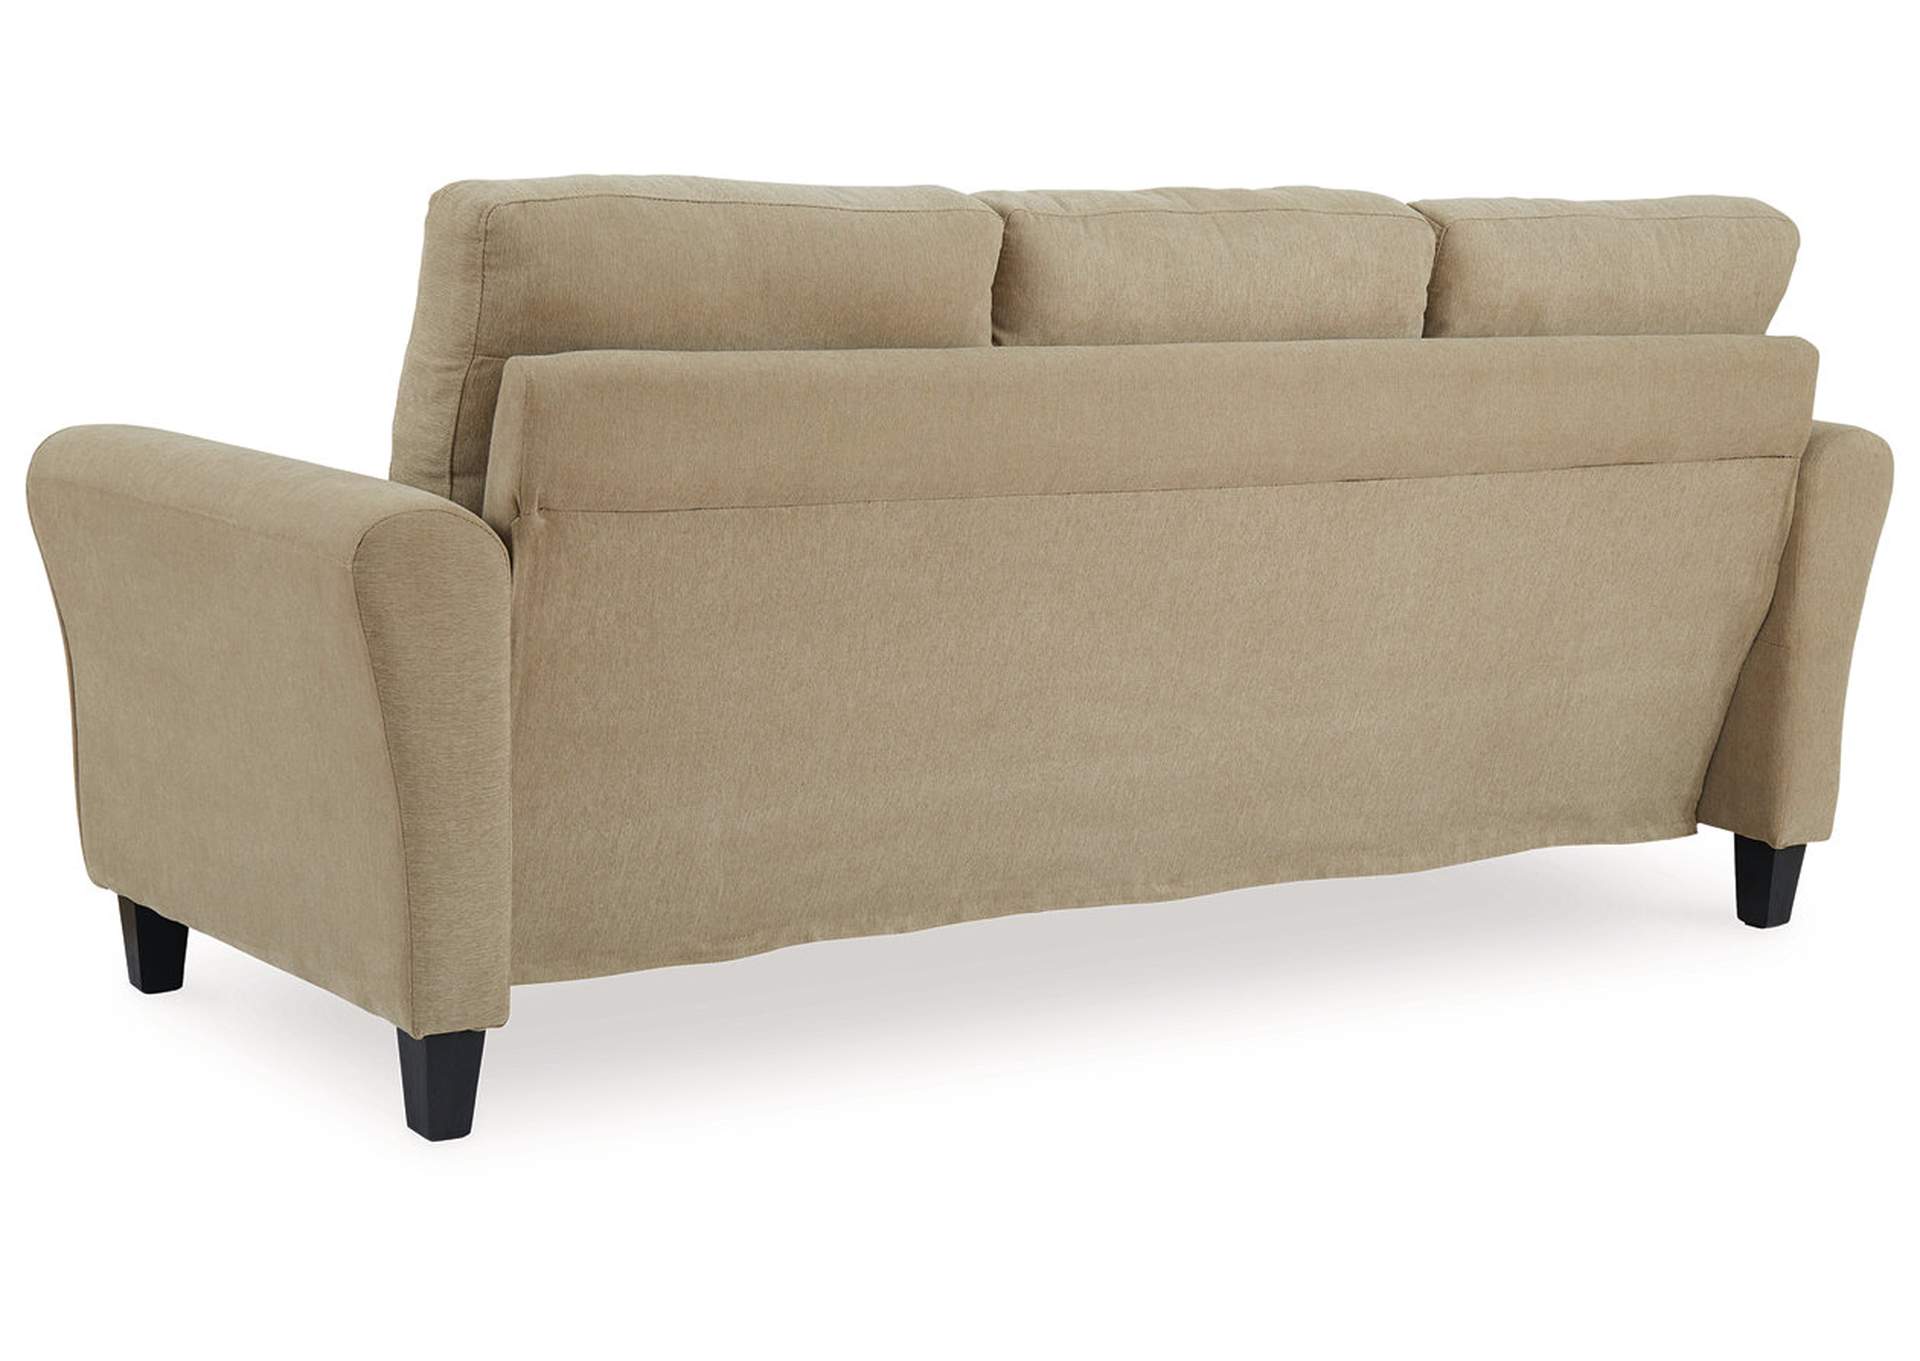 Carten Sofa and Loveseat,Signature Design By Ashley